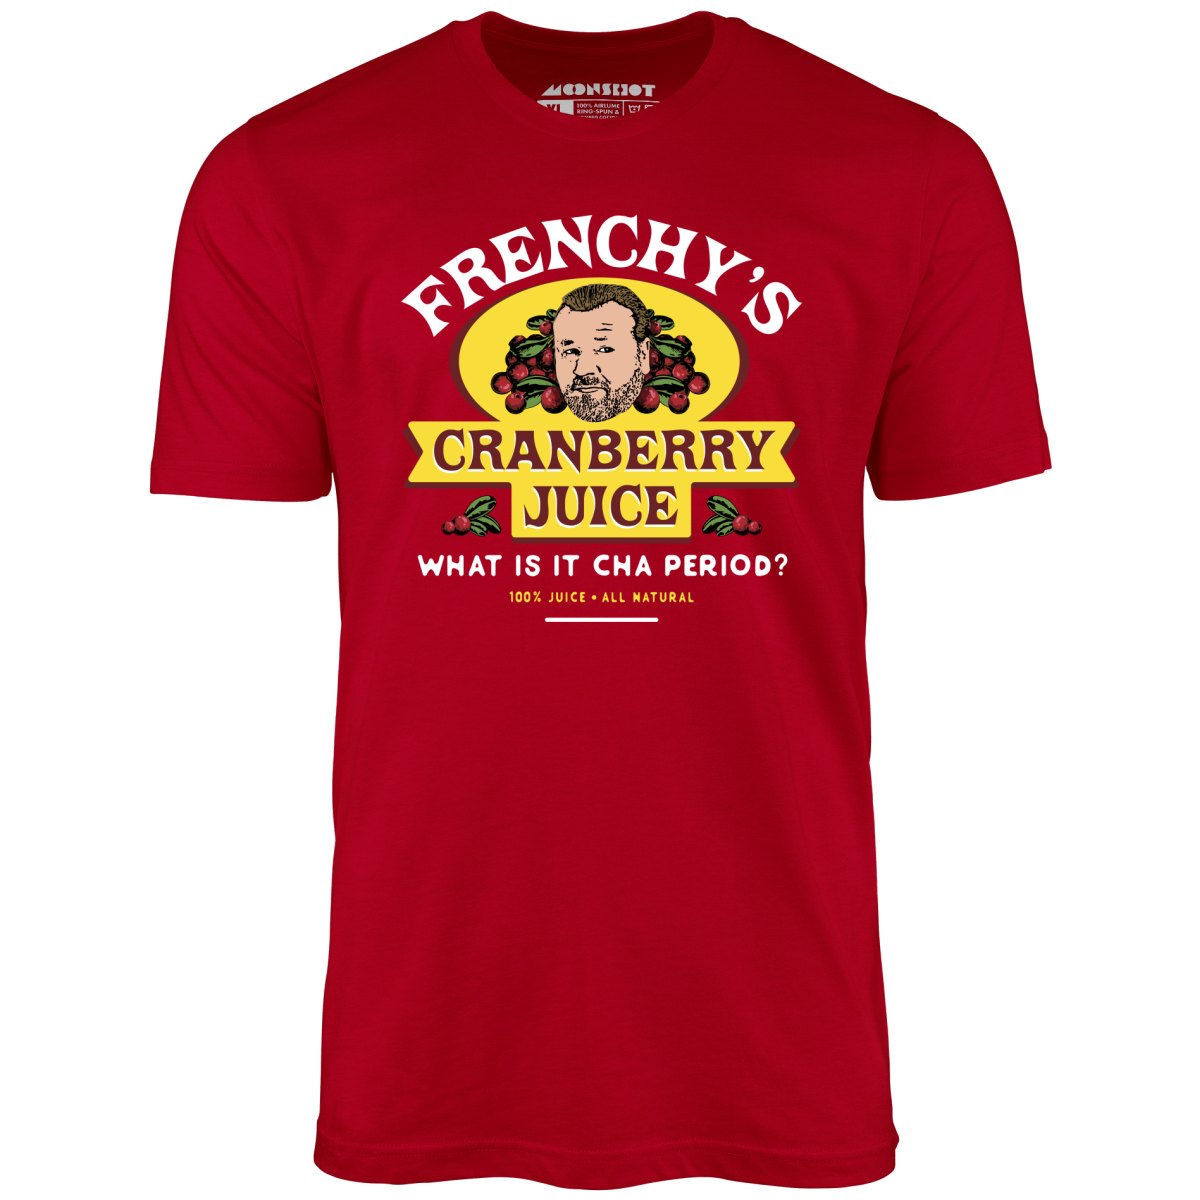 Frenchy's Cranberry Juice - The Departed - Unisex T-Shirt